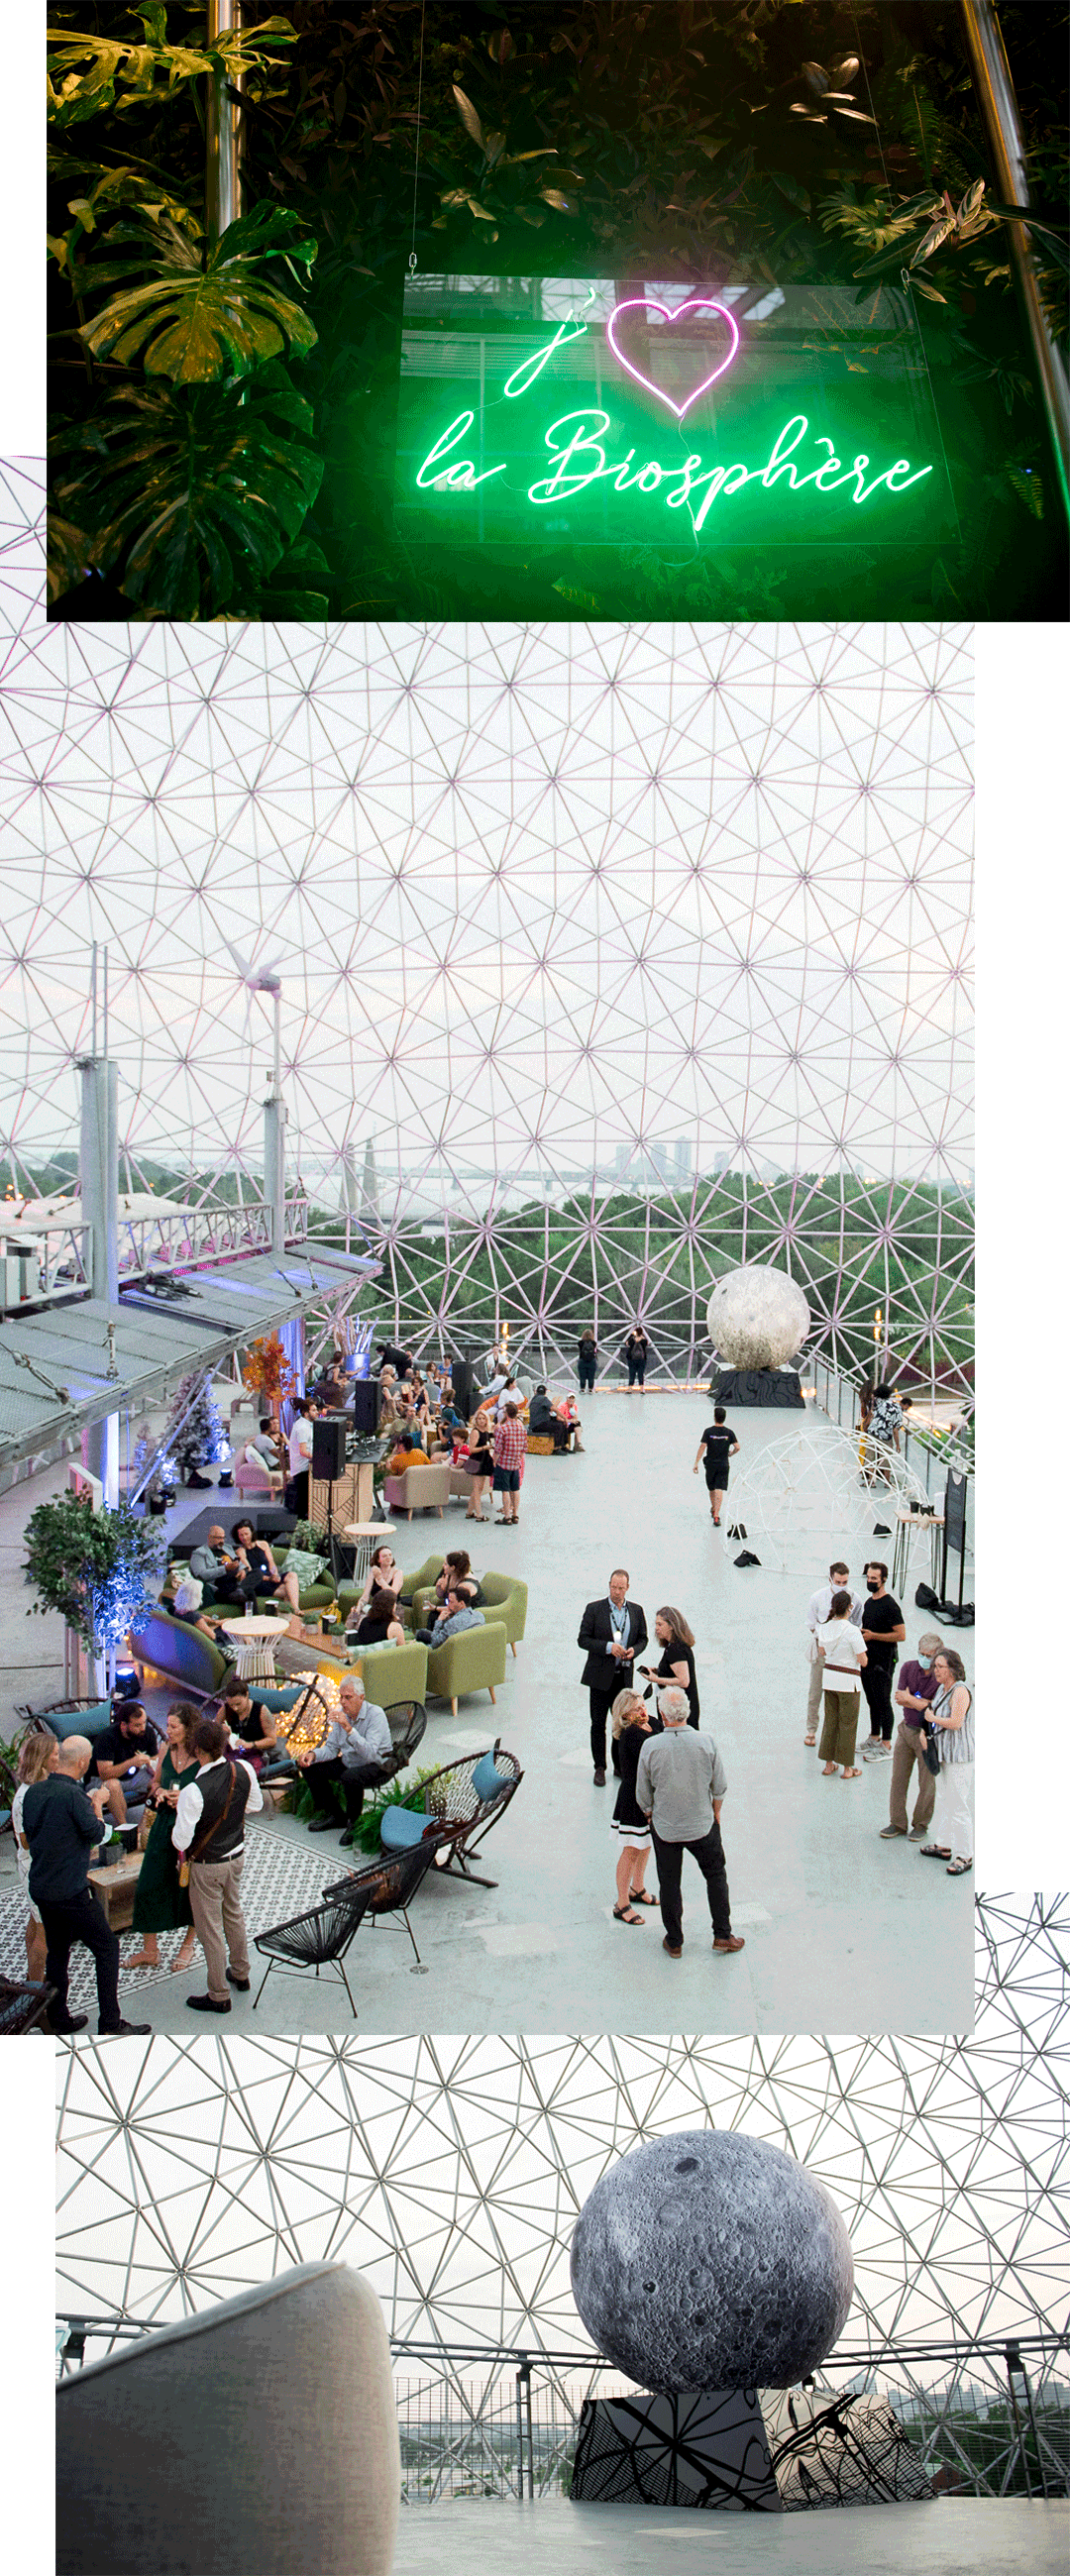 Biosphère, a utopic night at the museum | MASSIVart - Creative Events & Pop-up Production